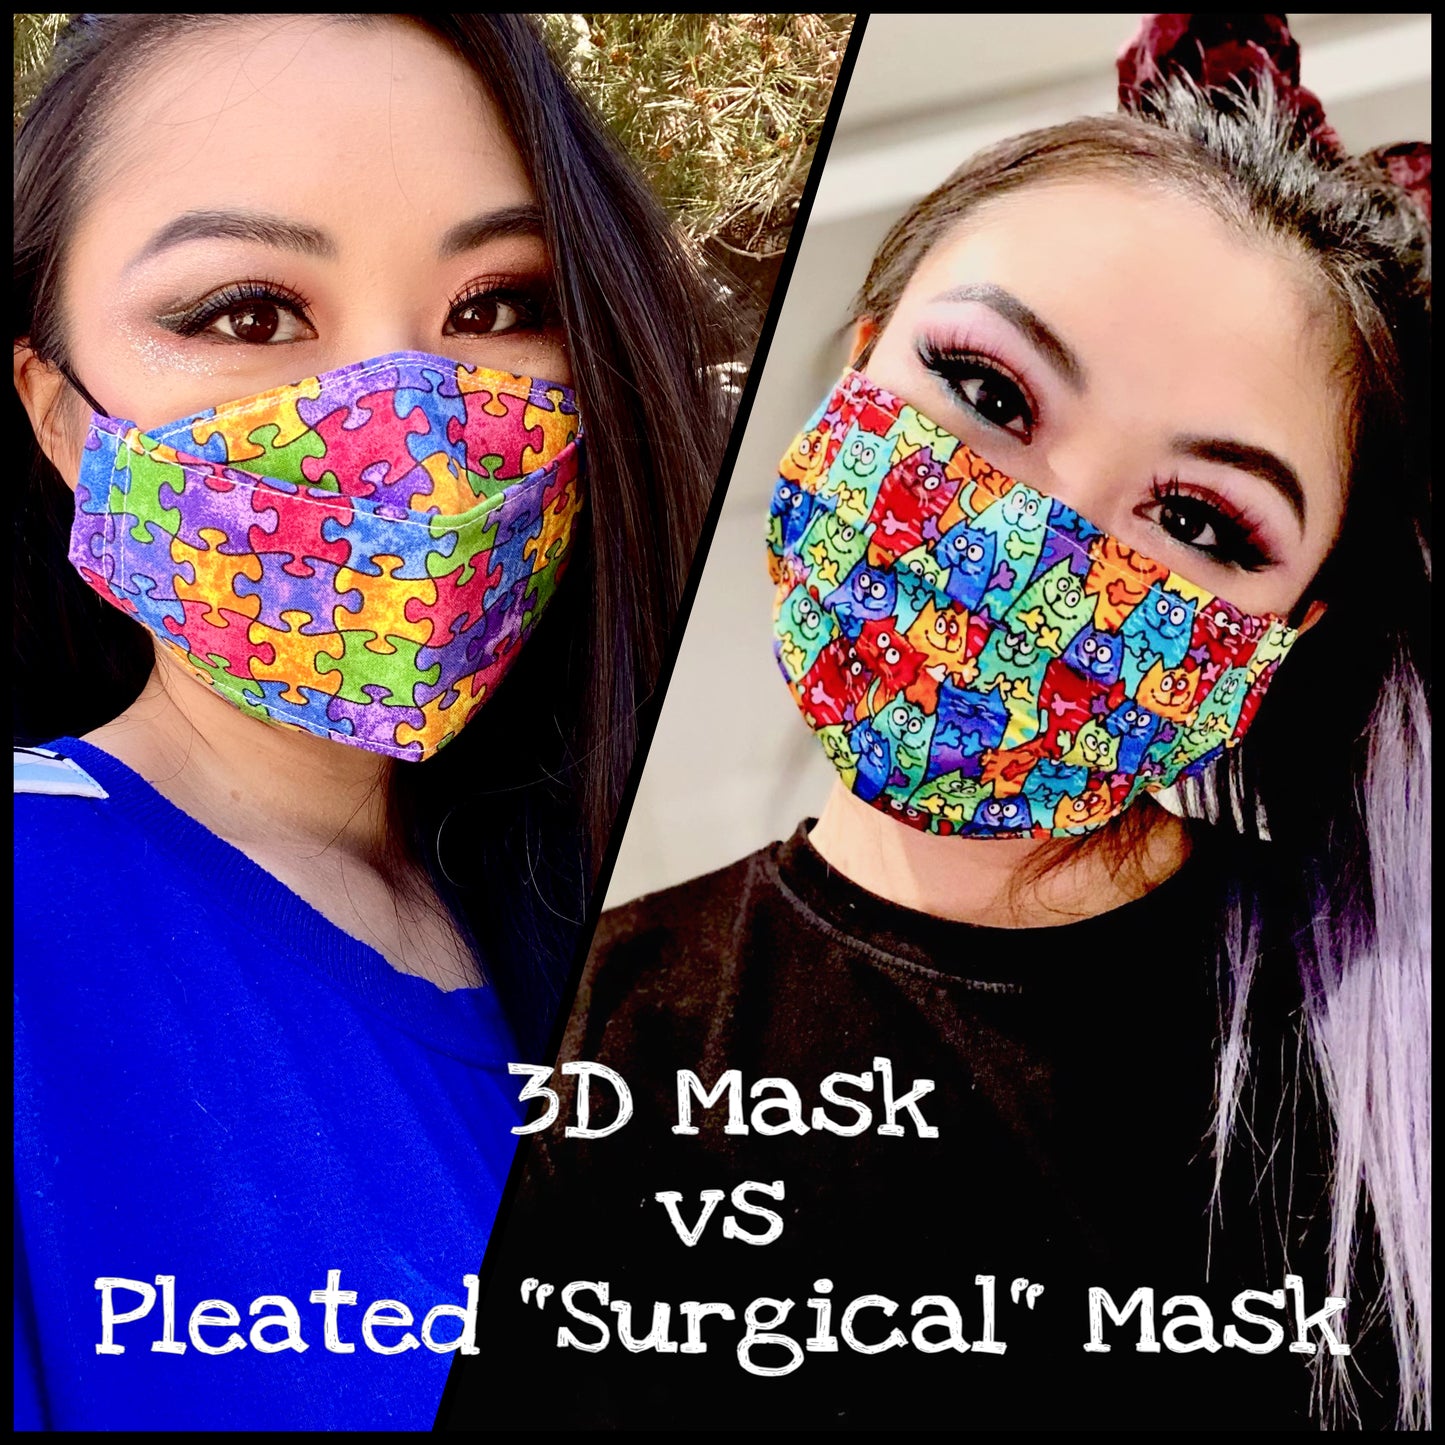 Black (Spider) Web 2 Layer Cotton Face Mask with Filter Pocket, Nose Wire, Adjustable Ear Loops